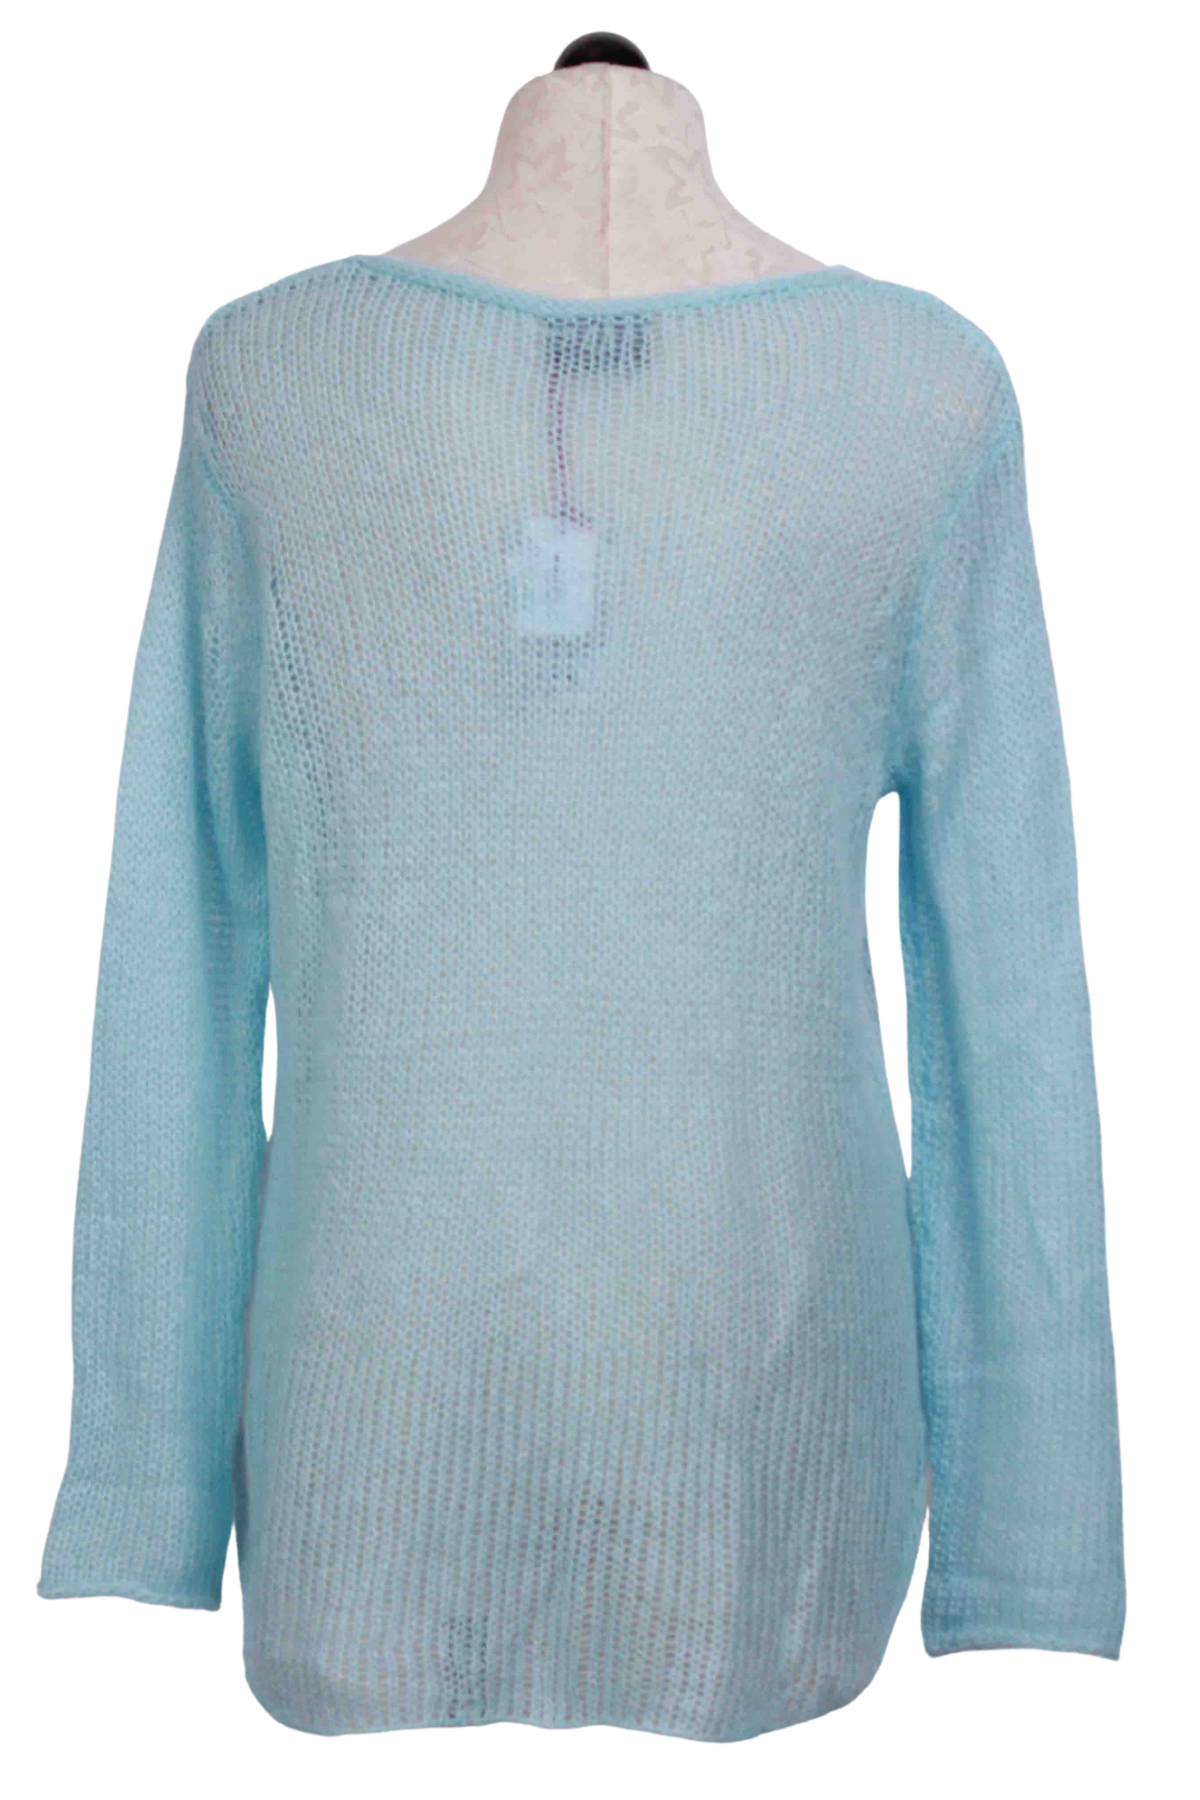 back view of Lightweight V Neck Sweater by Wooden Ships in Sky